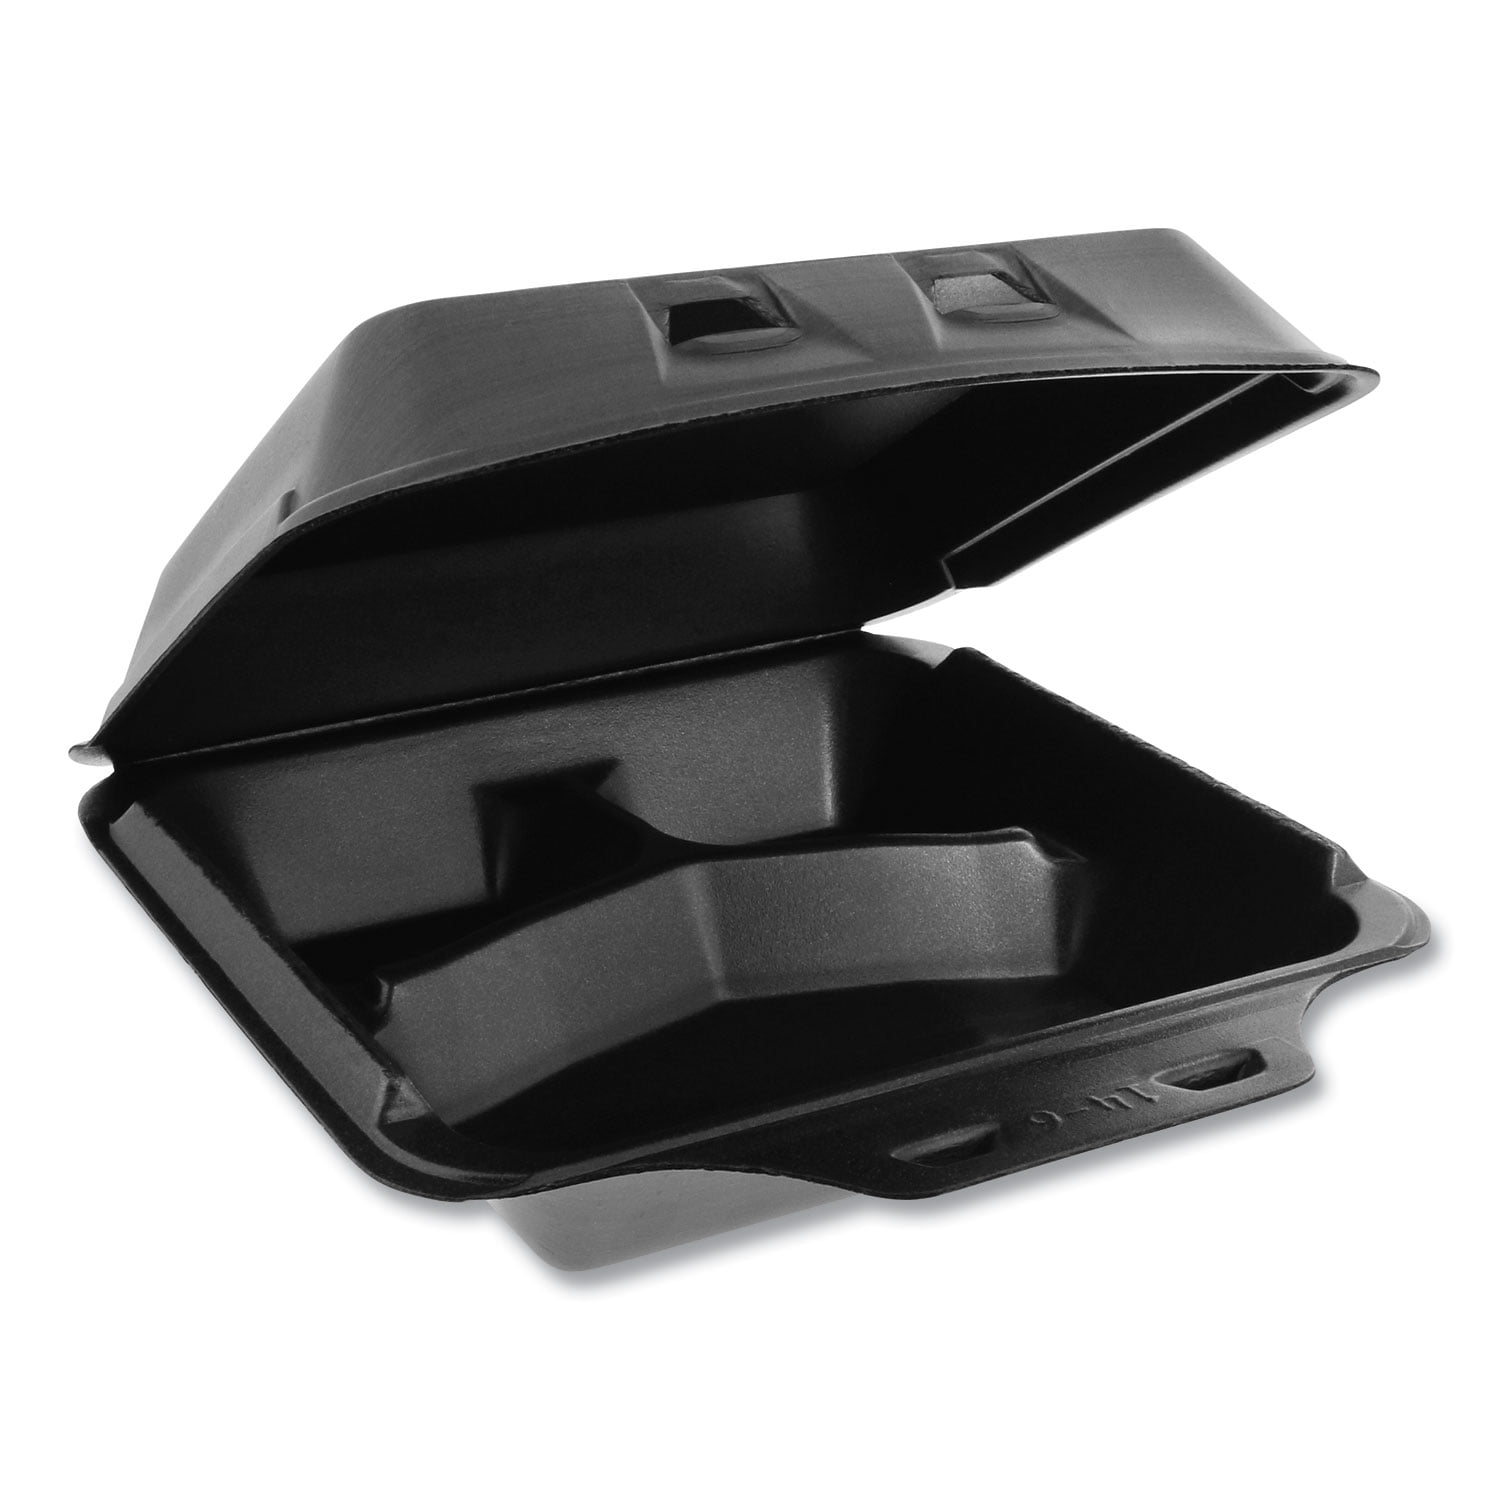 Dart Foam Hinged Lid Containers, 3-Compartment, 8.38 x 7.78 x 3.25 